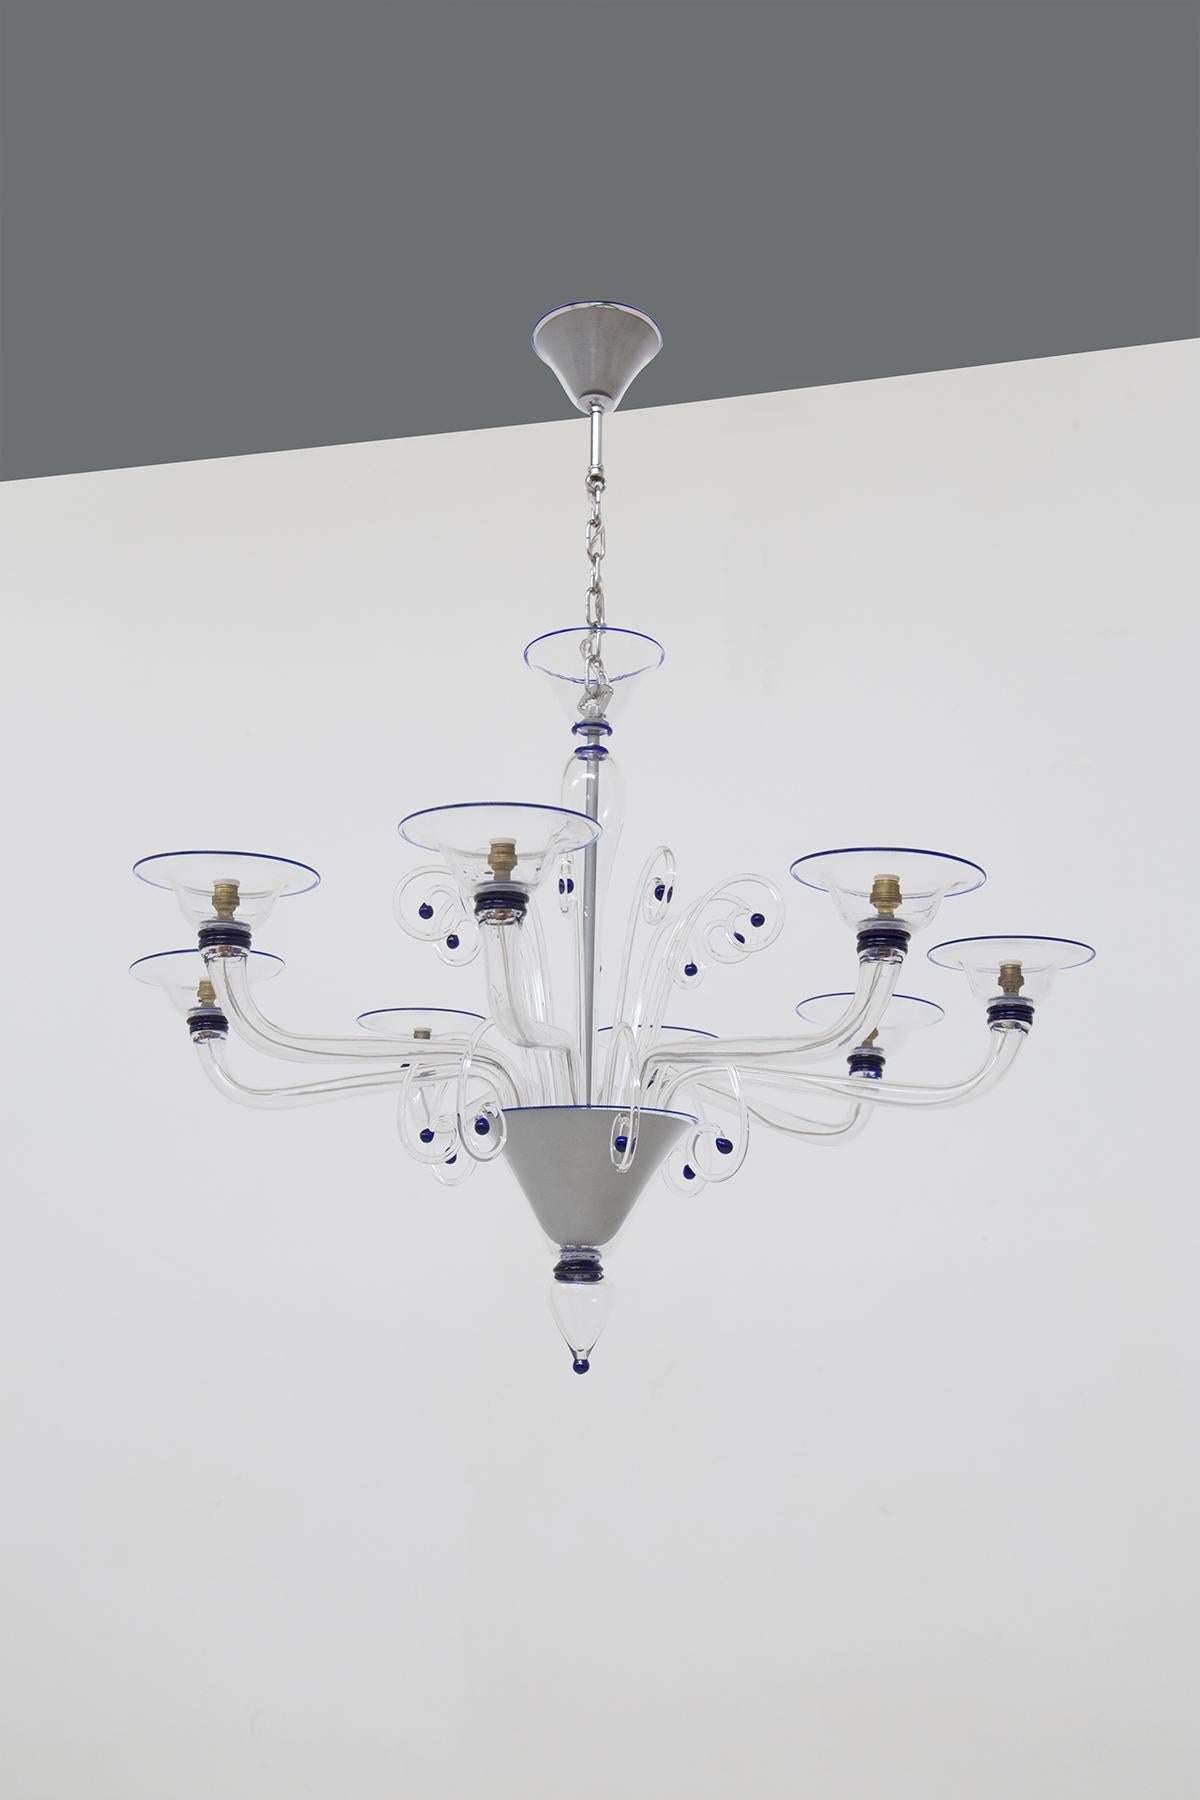 The splendid vintage chandelier is made in the ‘60s with Murano glass. 
The whole aluminum structure is encased in an elegant and sumptuous glass. The lower conic conical shape there are 8 curved arms that each hold a light bulb. The arms widen and